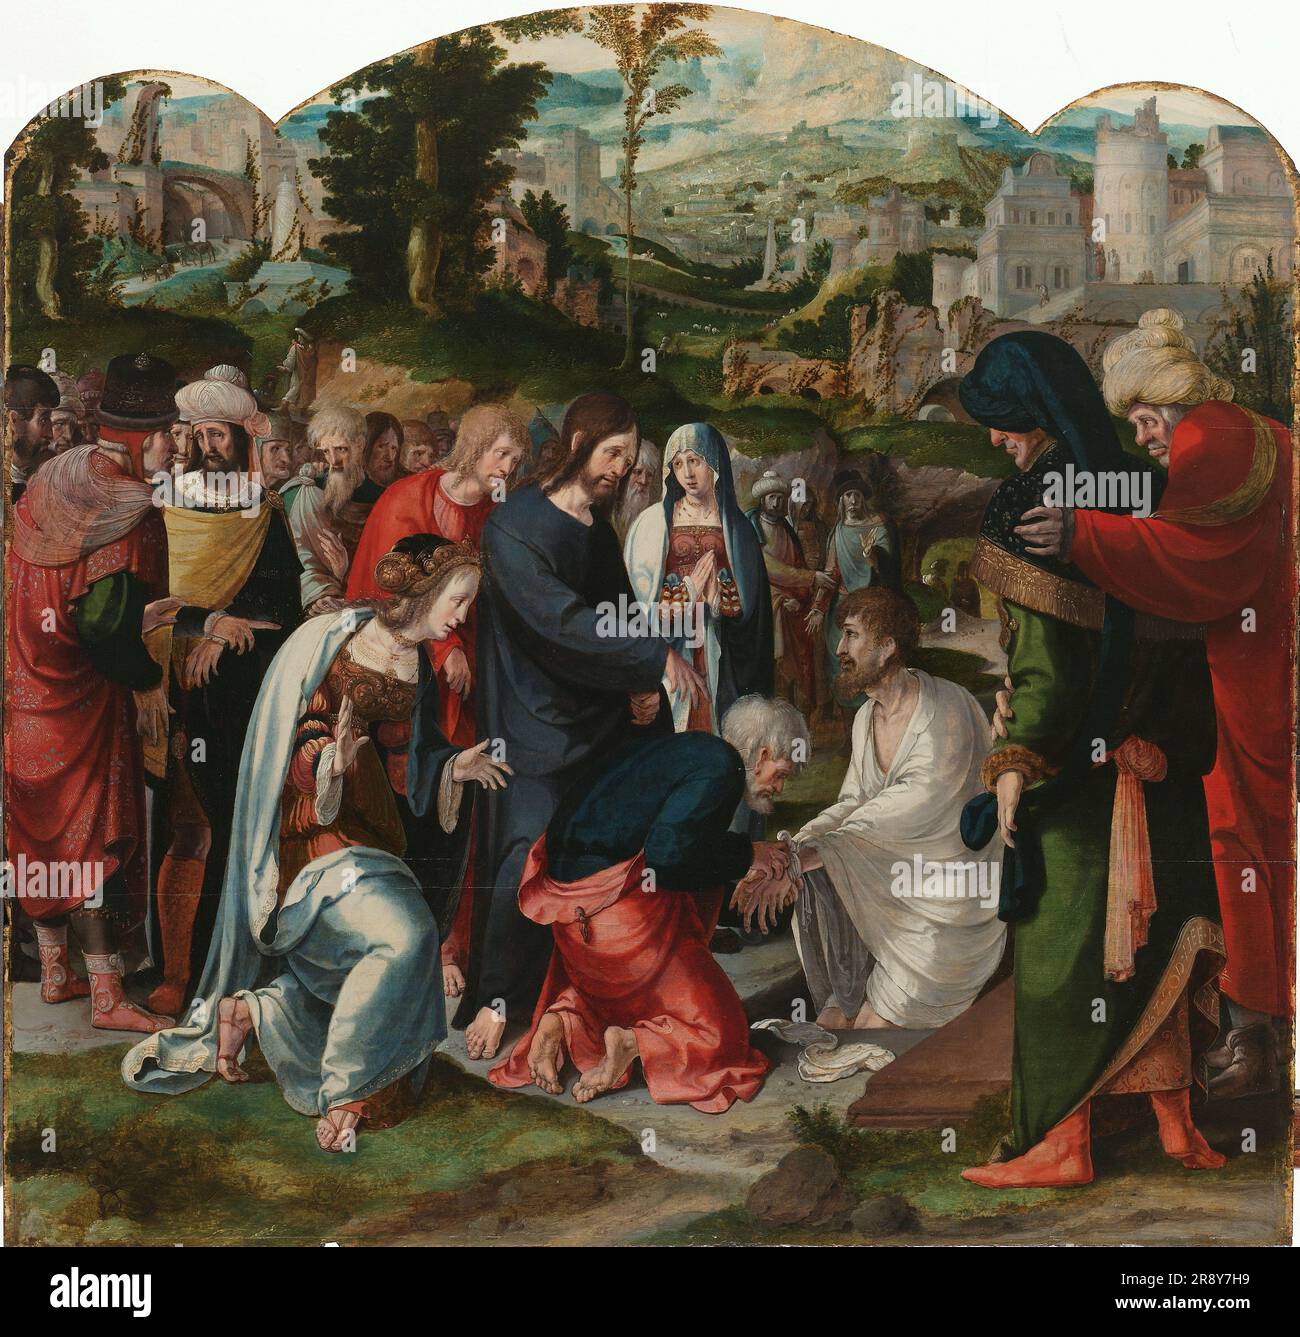 The Raising of Lazarus, c.1530-c.1535. Other Title(s): Centre Panel of a Triptych with the Raising of Lazarus. Although there is no mention of it in the gospel, the artist shows St Peter loosening Lazarus&#x2019;s shroud, possibly as a symbol of freeing him from sin. This element was undoubtedly taken from another source, quite possibly a play about Lazarus of c. 1530. The inscription on the hem of the robe of the second man from the right in the foreground is a reference to Matthew 22:37. Stock Photo